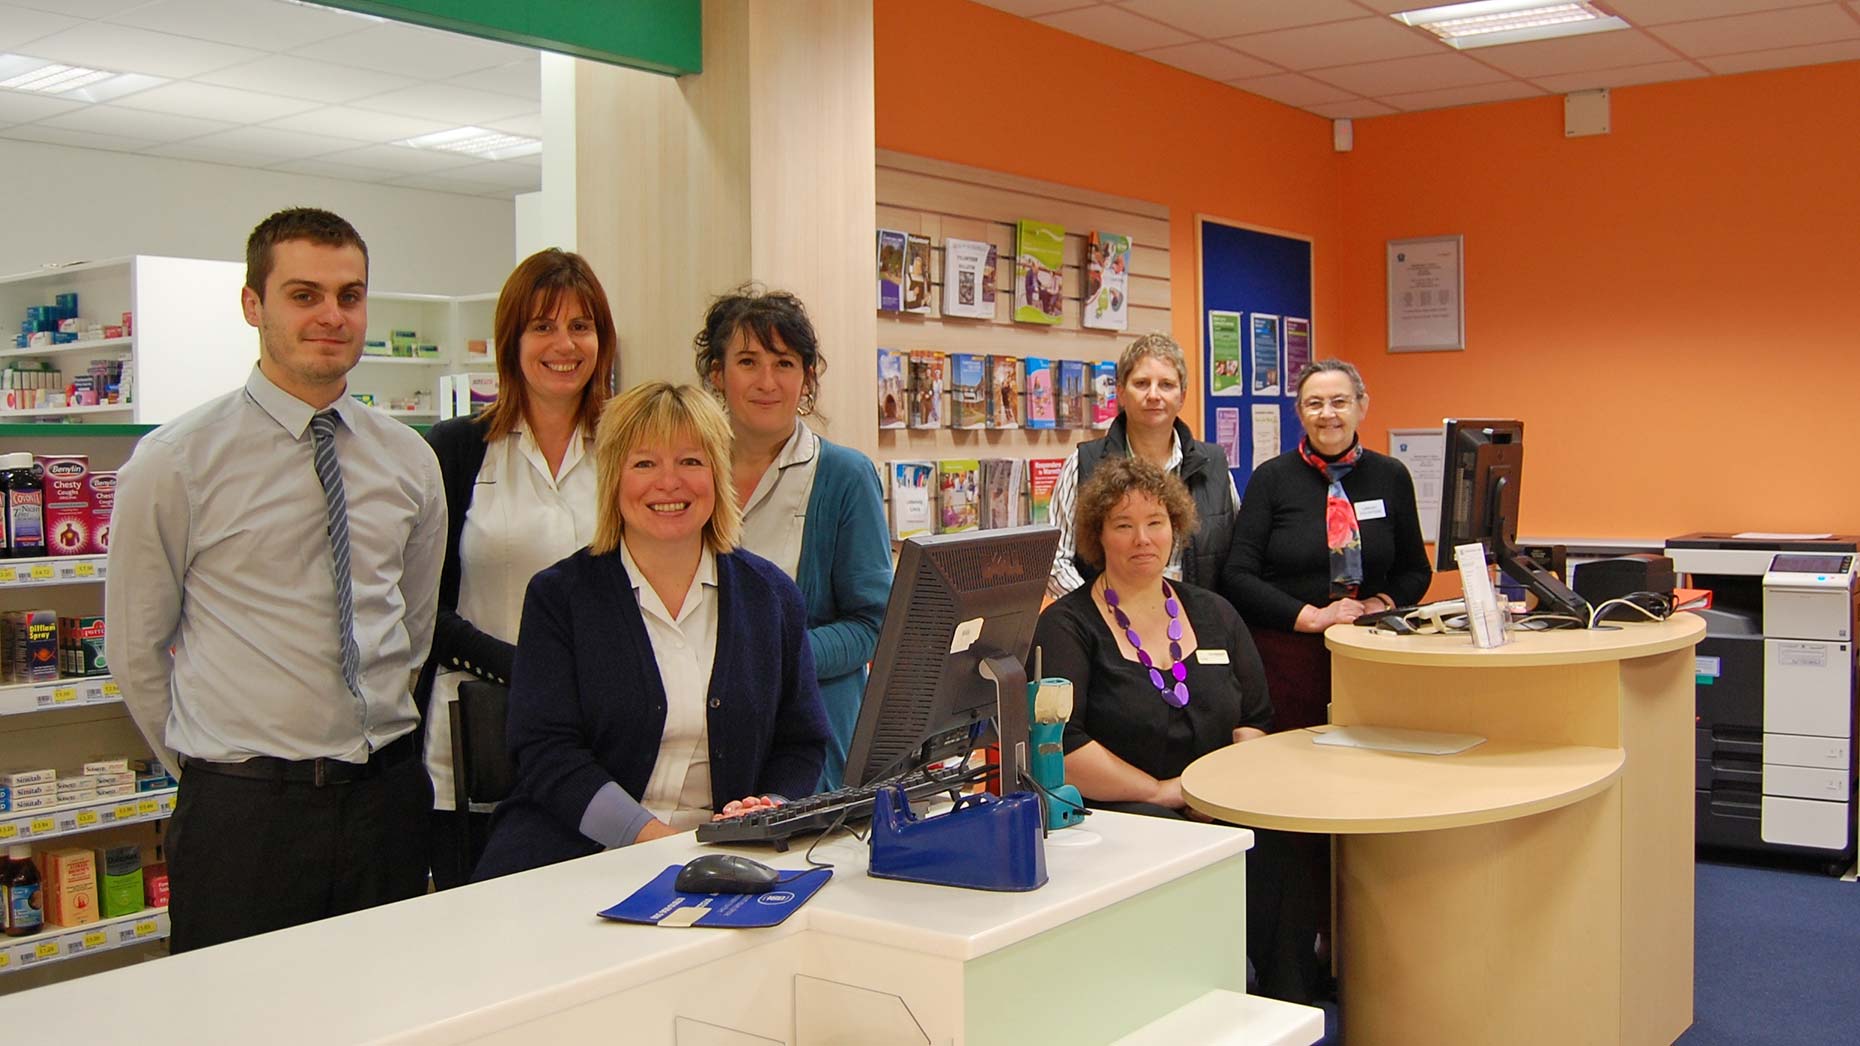 The Waddington Pharmacy team (L): Pharmacist Chris Donnan, Karen Barker and Rachel Aloi and Rachel Hart, along with members of the county council’s Library Services team (R) Cathy Rushton and Jill Trowsdale and volunteer Alison Peden.